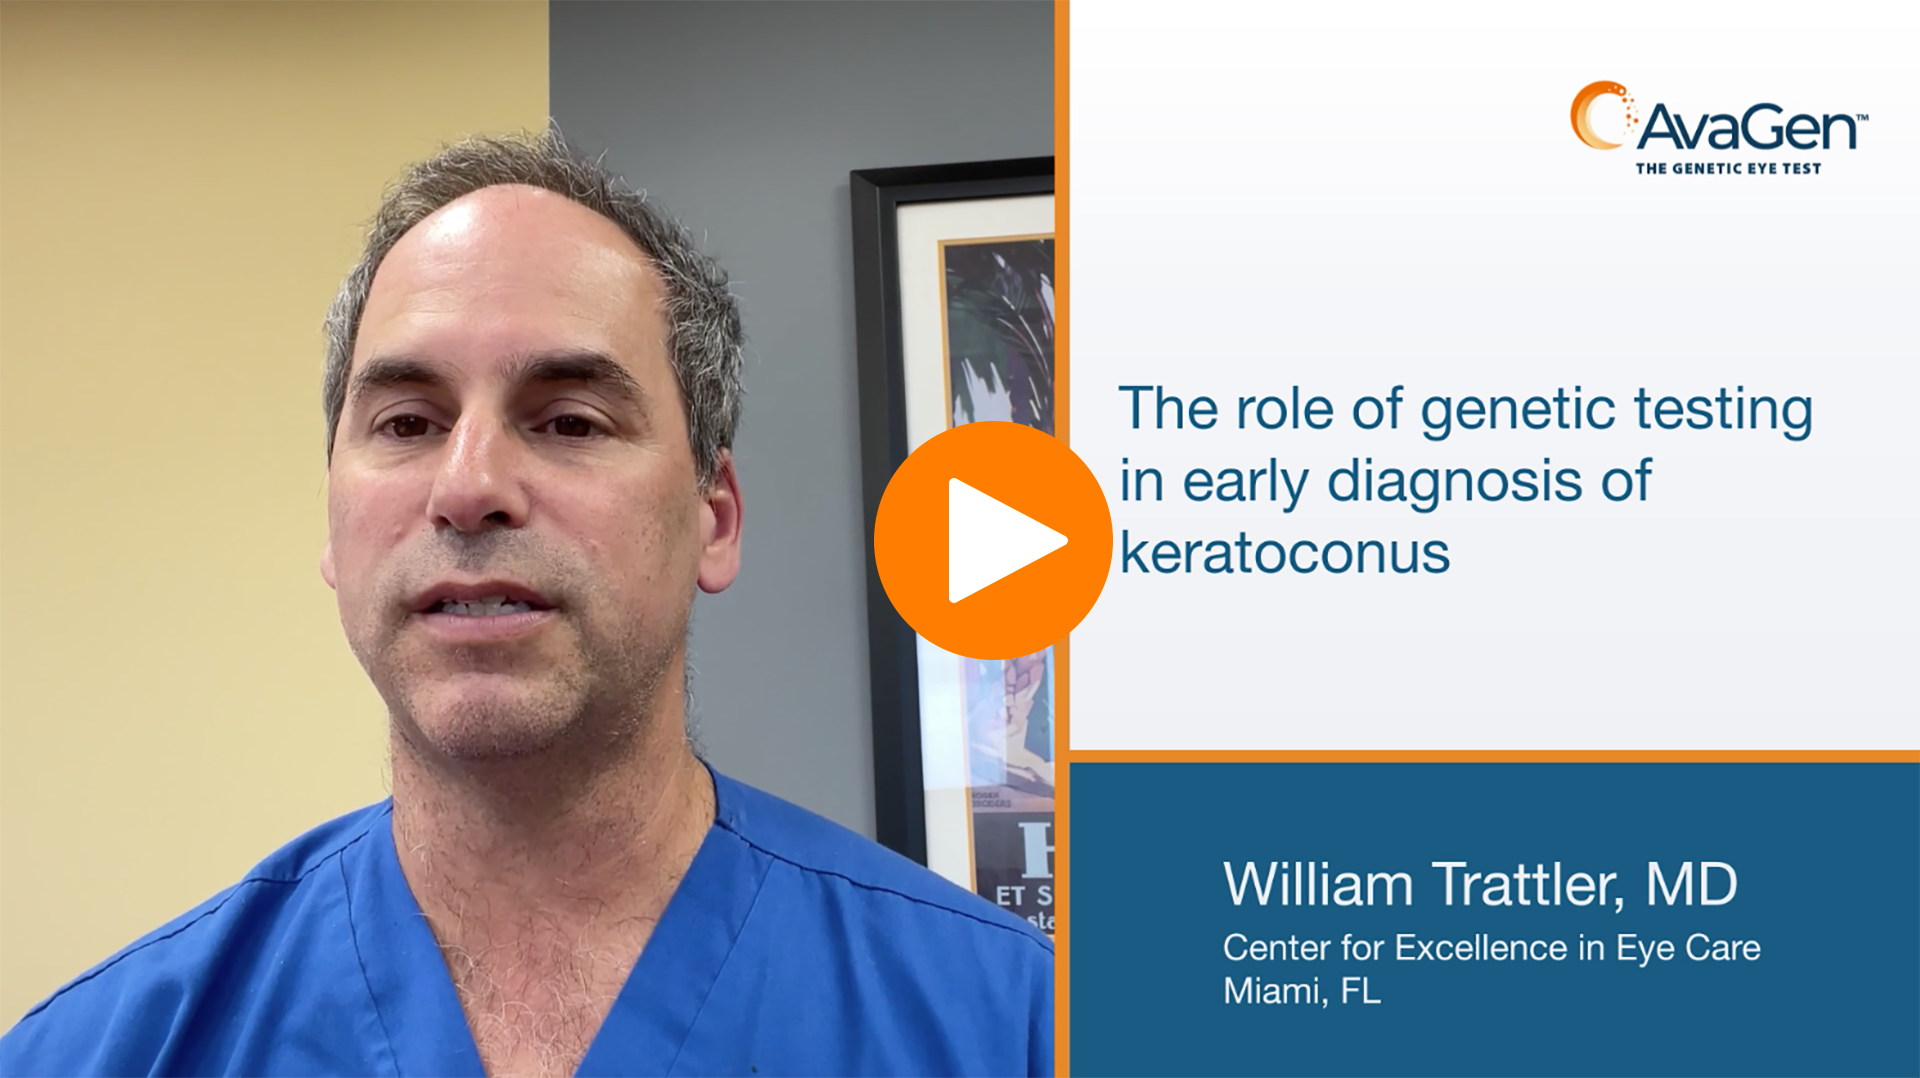 The role of genetic testing in early diagnosis of keratoconus